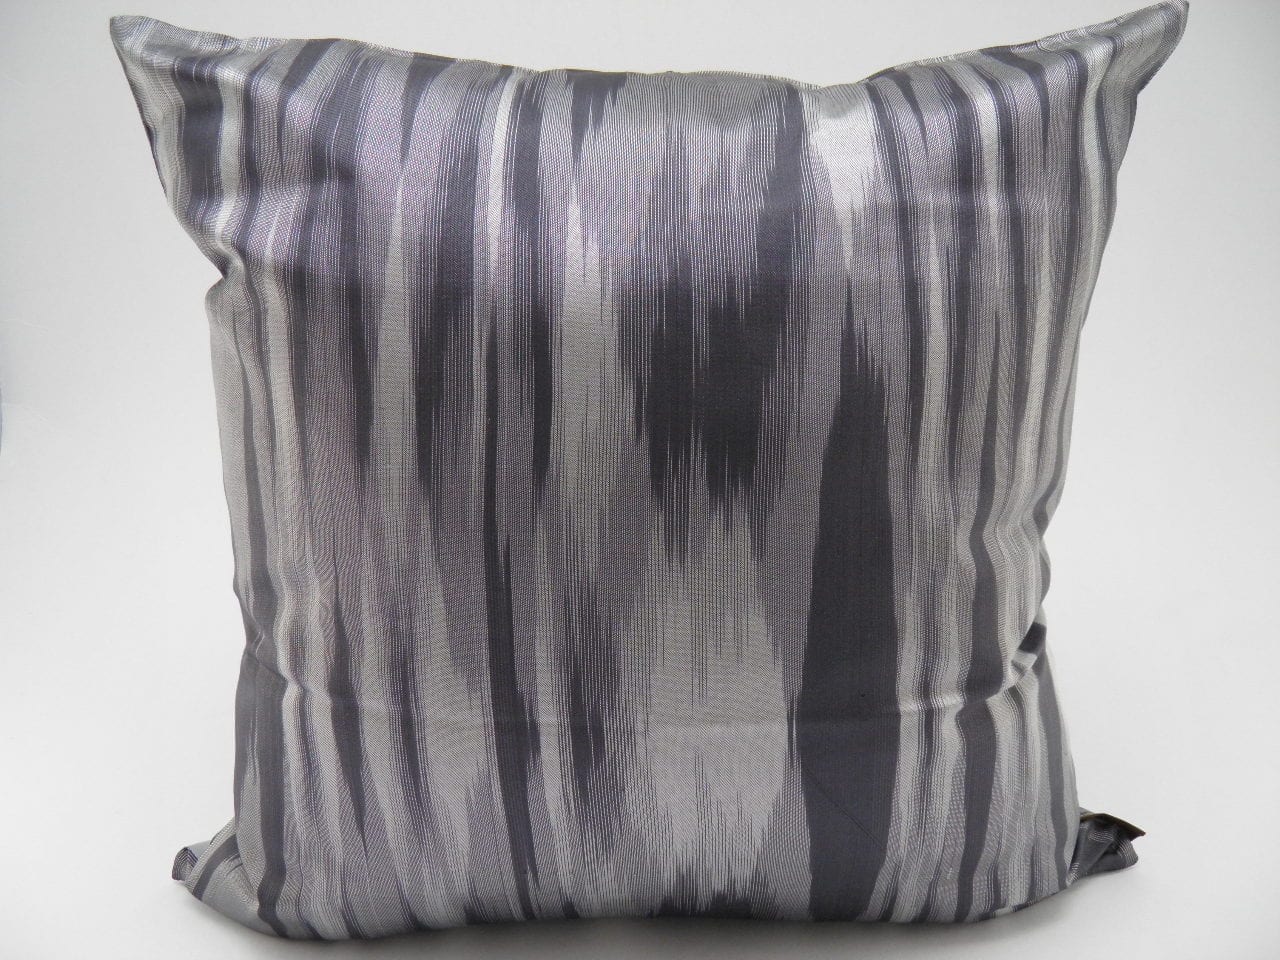 IKAT Cushion Cover - Charcoal / Silver - 45x45cm